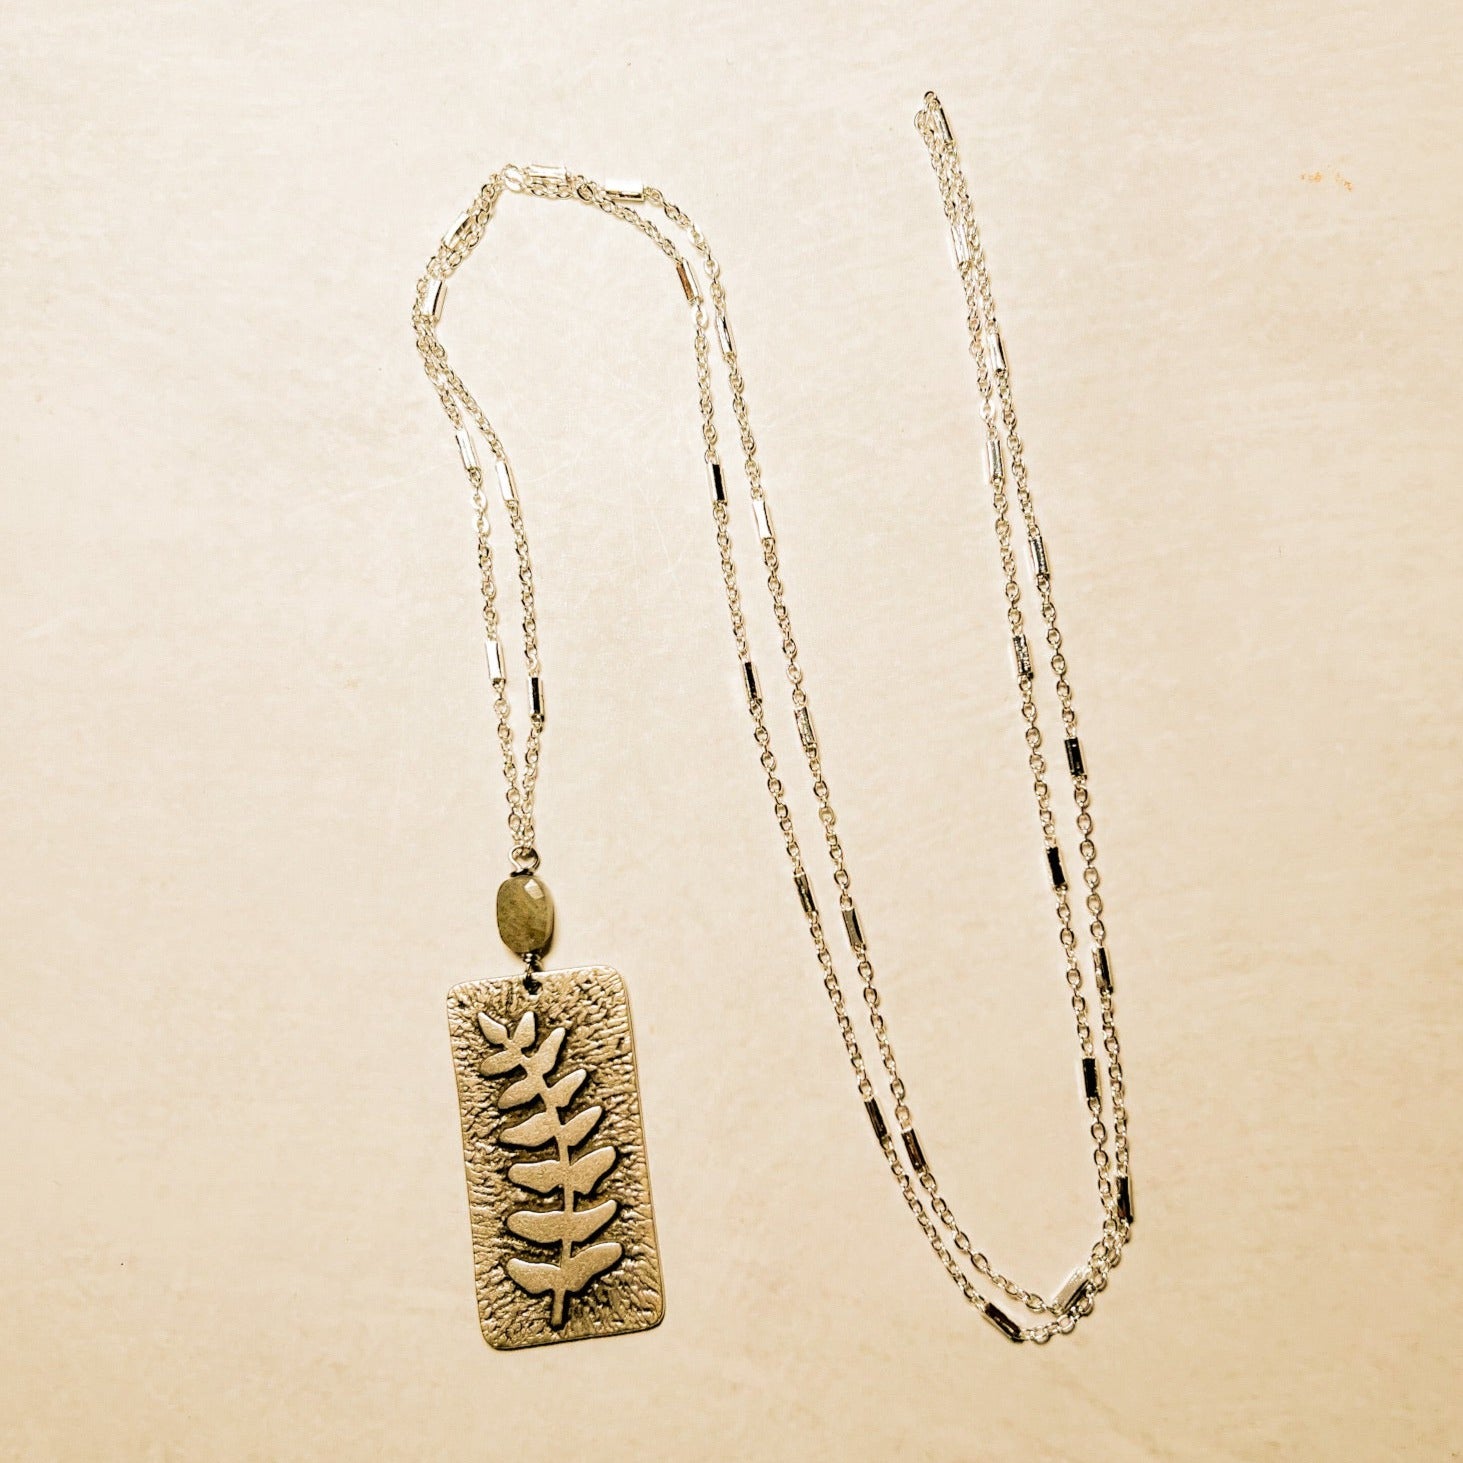 Long Fern Leaf Amulet Necklace - Gold or Silver Plated